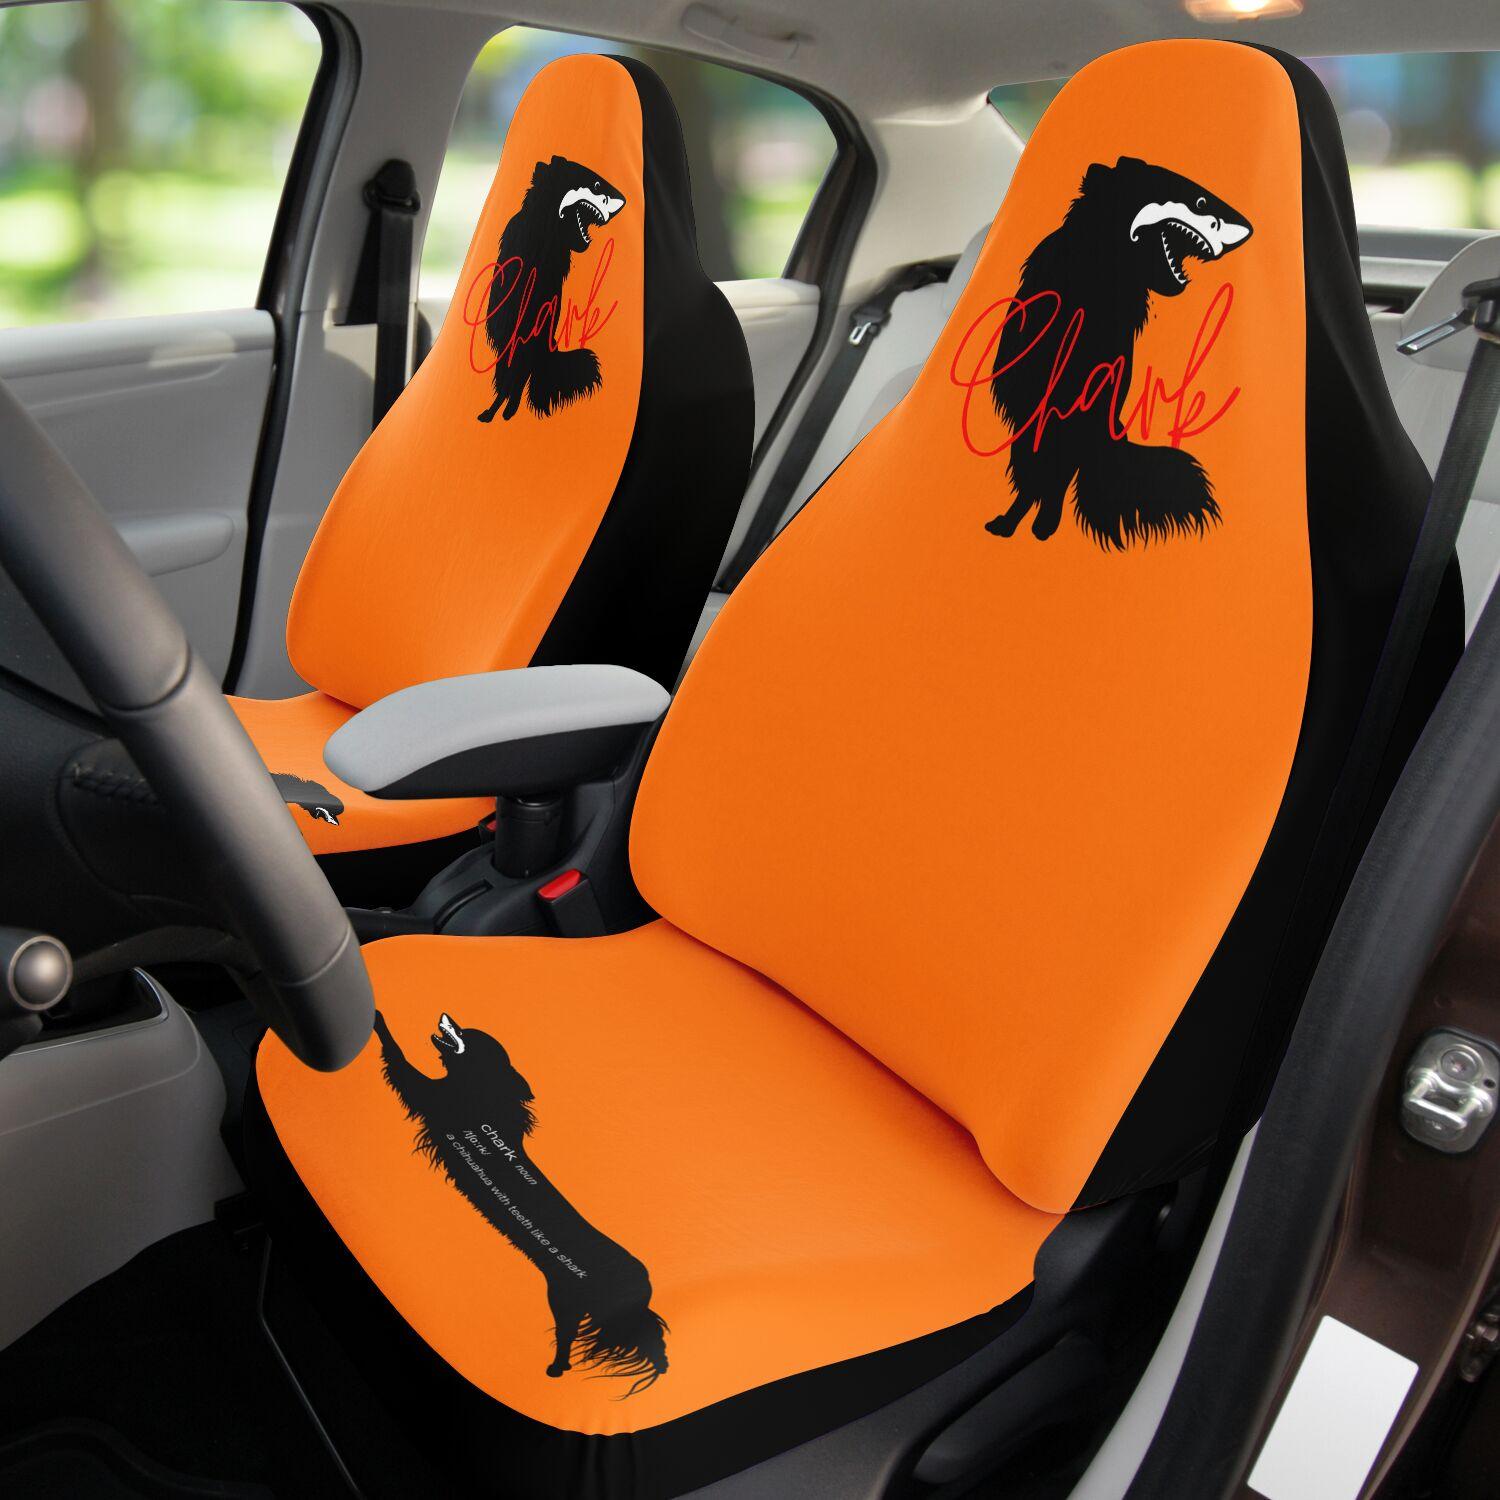 This punky pair of rally orange front car seat covers feature the silhouette of a black longhair chihuahua with the face of a great white shark - mouth open to show off jaws lined with sharp teeth. The word "Chark" is artfully placed in red cursive font over the image. The seat fronts feature another shark-faced chihuahua, and a "dictionary entry" of the noun "chark": a chihuahua with teeth like a shark. Design by Renate Kriegler for Chimigos.